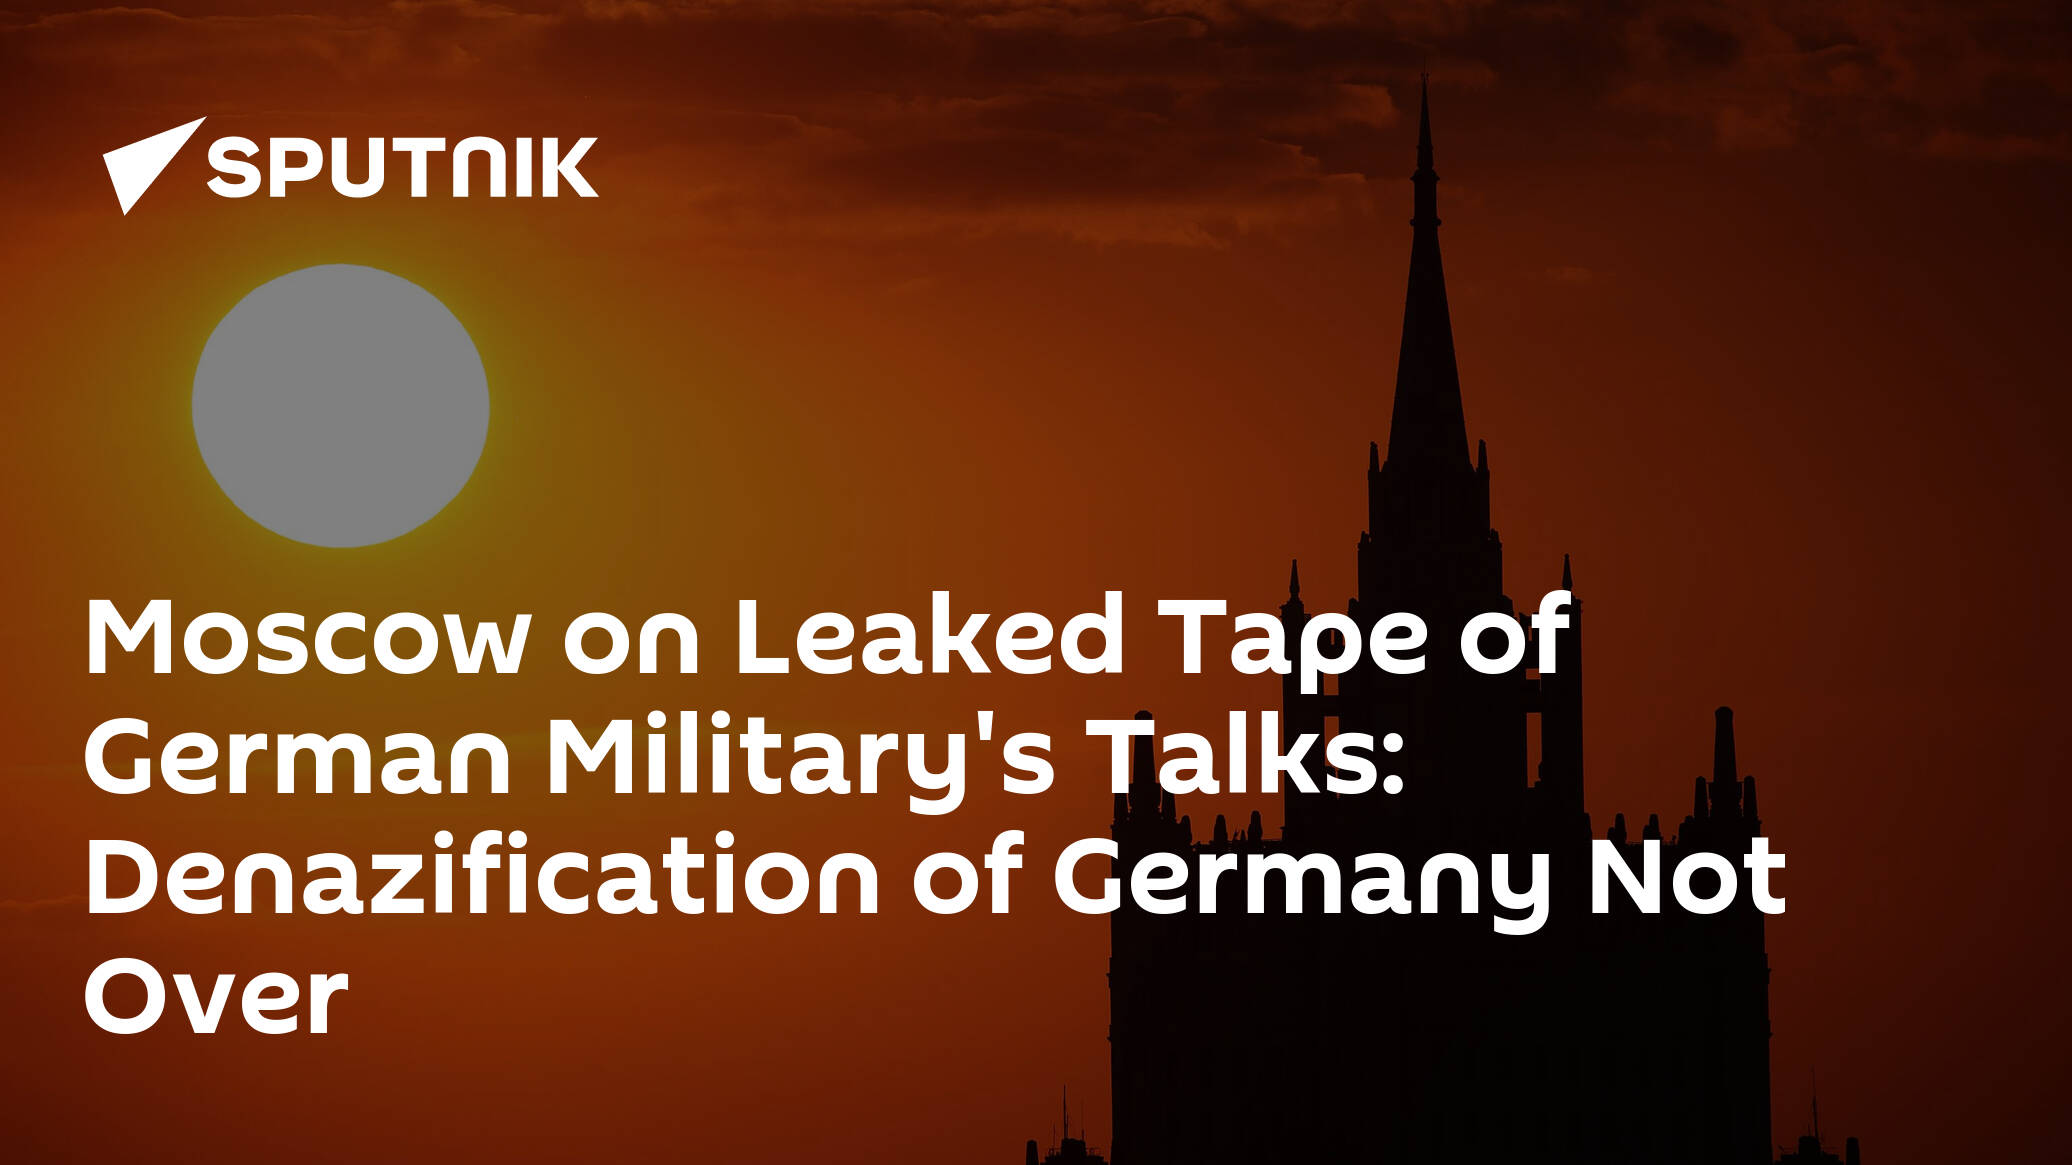 Moscow on Leaked Tape of German Military's Talks: Denazification of Germany Not Over